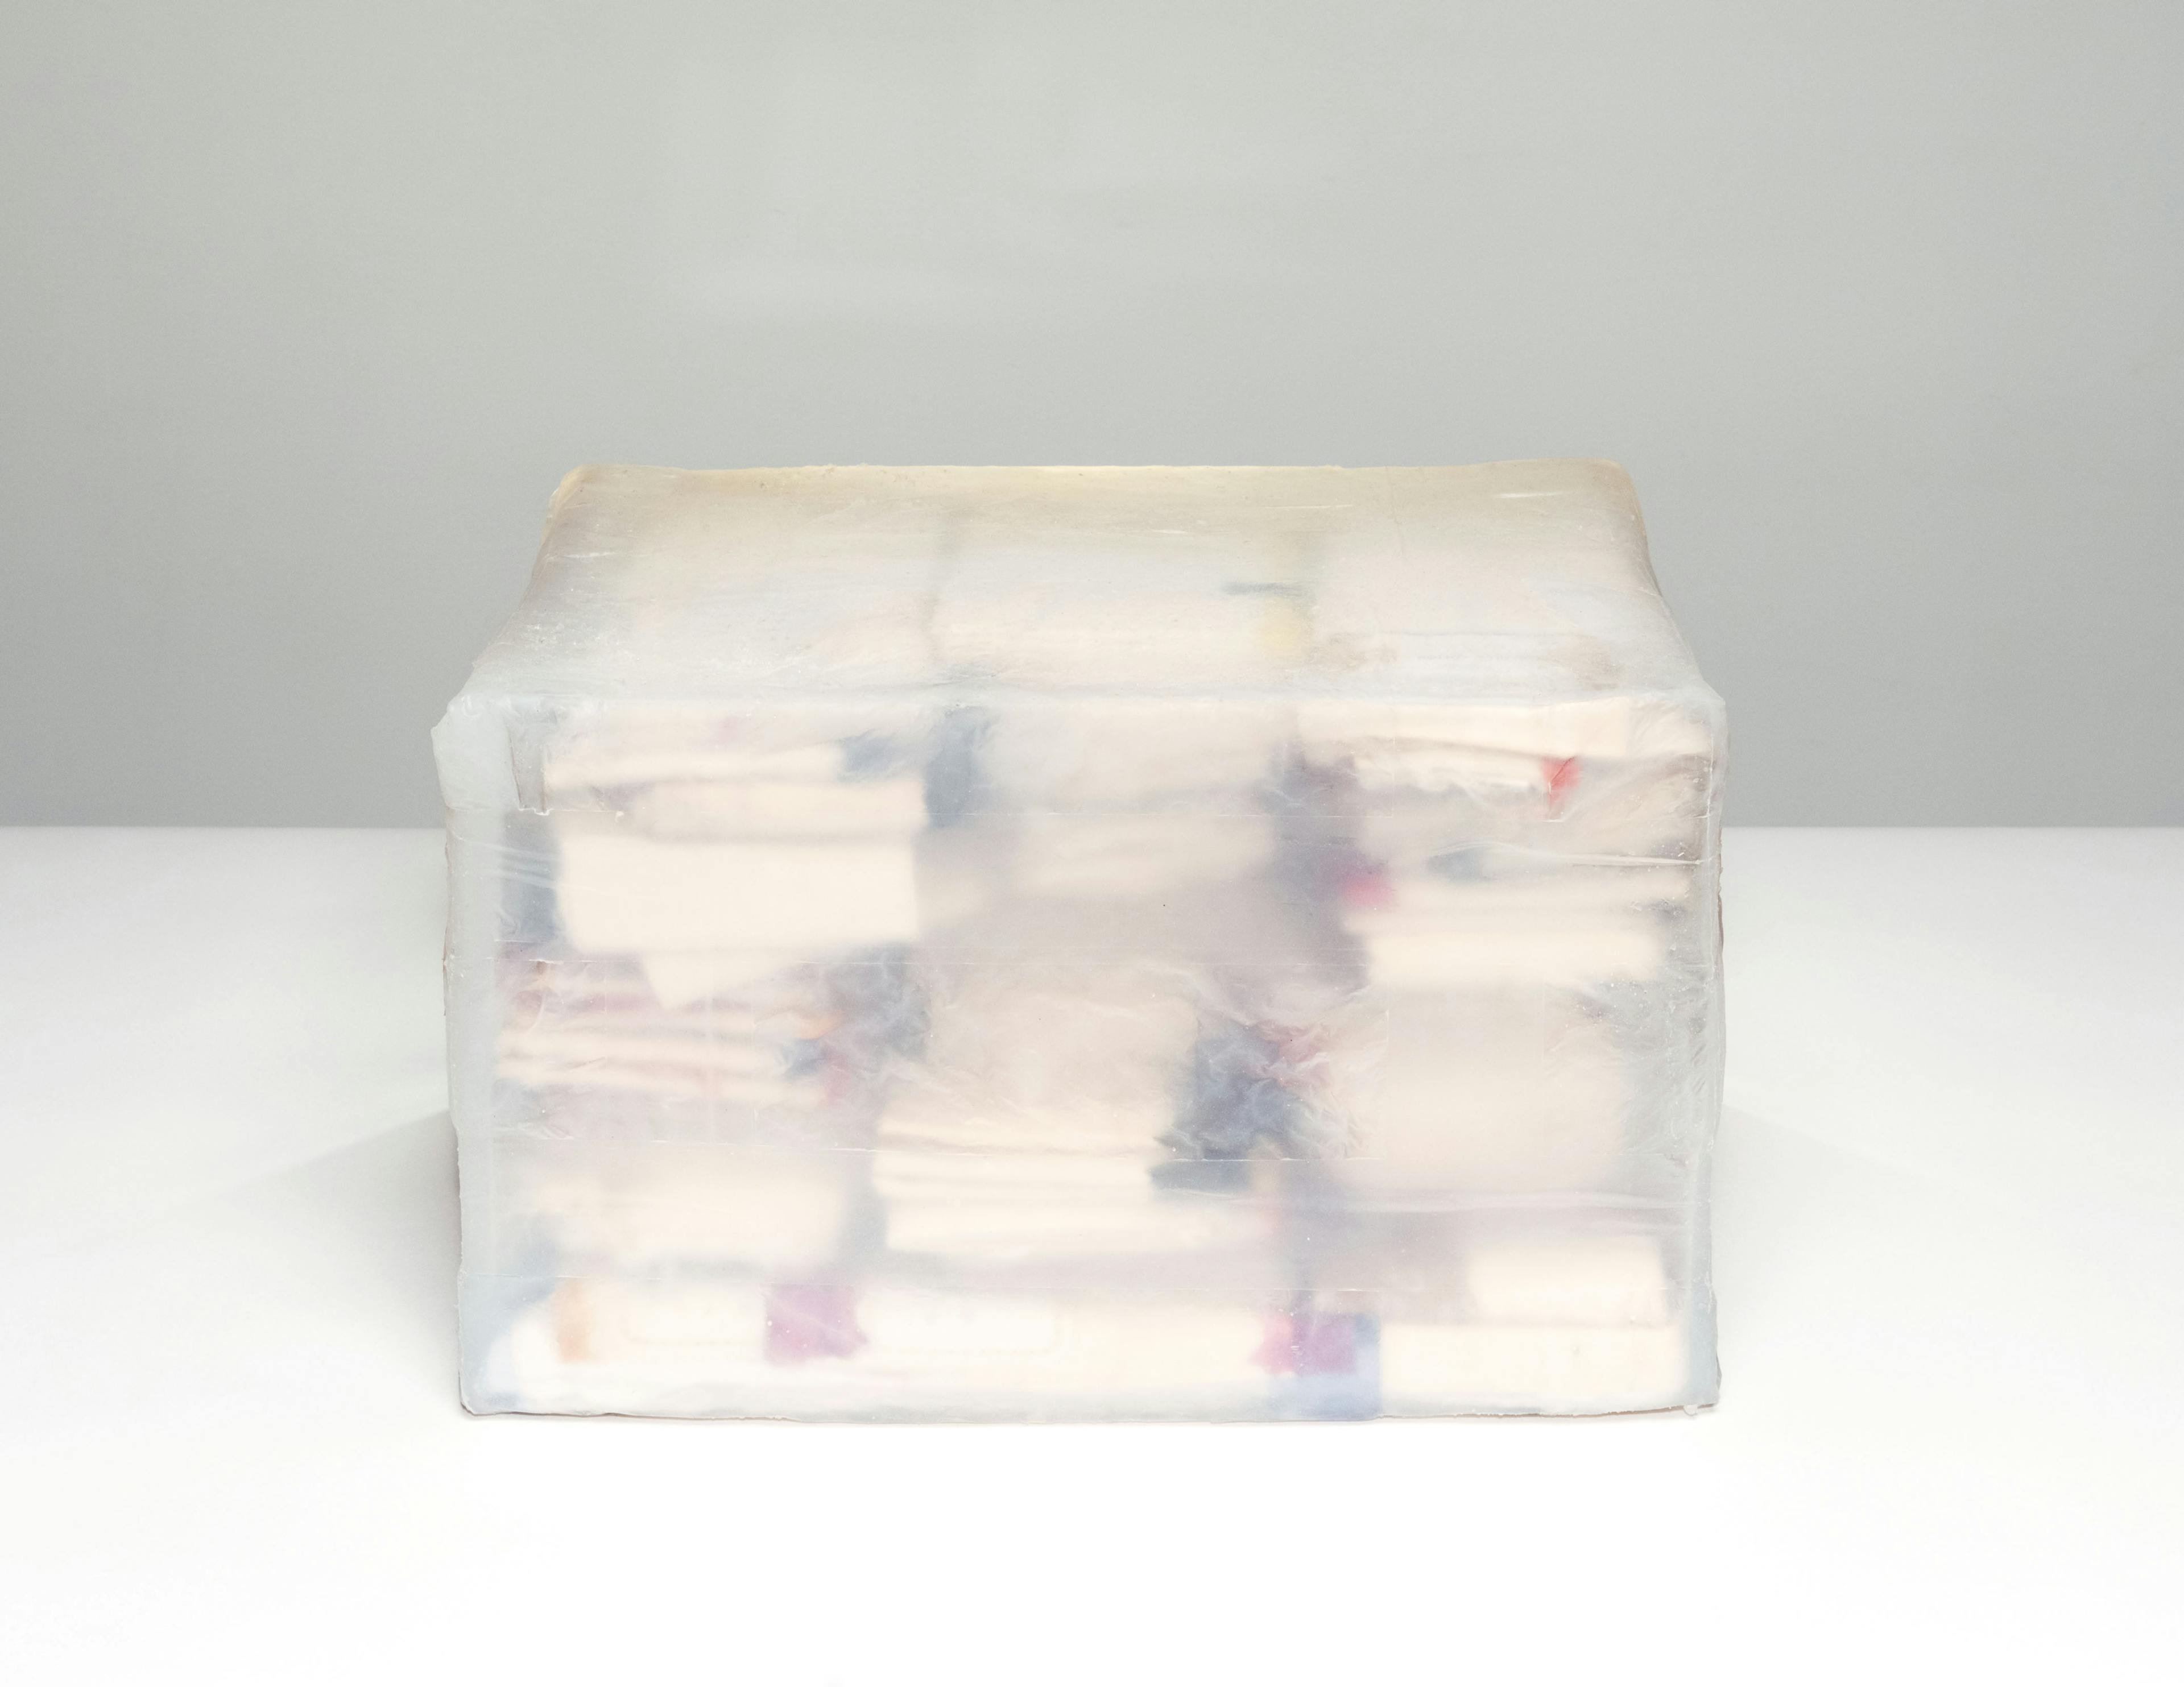 A box-shaped sculpture made from translucent silicone with indiscernible shapes inside. 